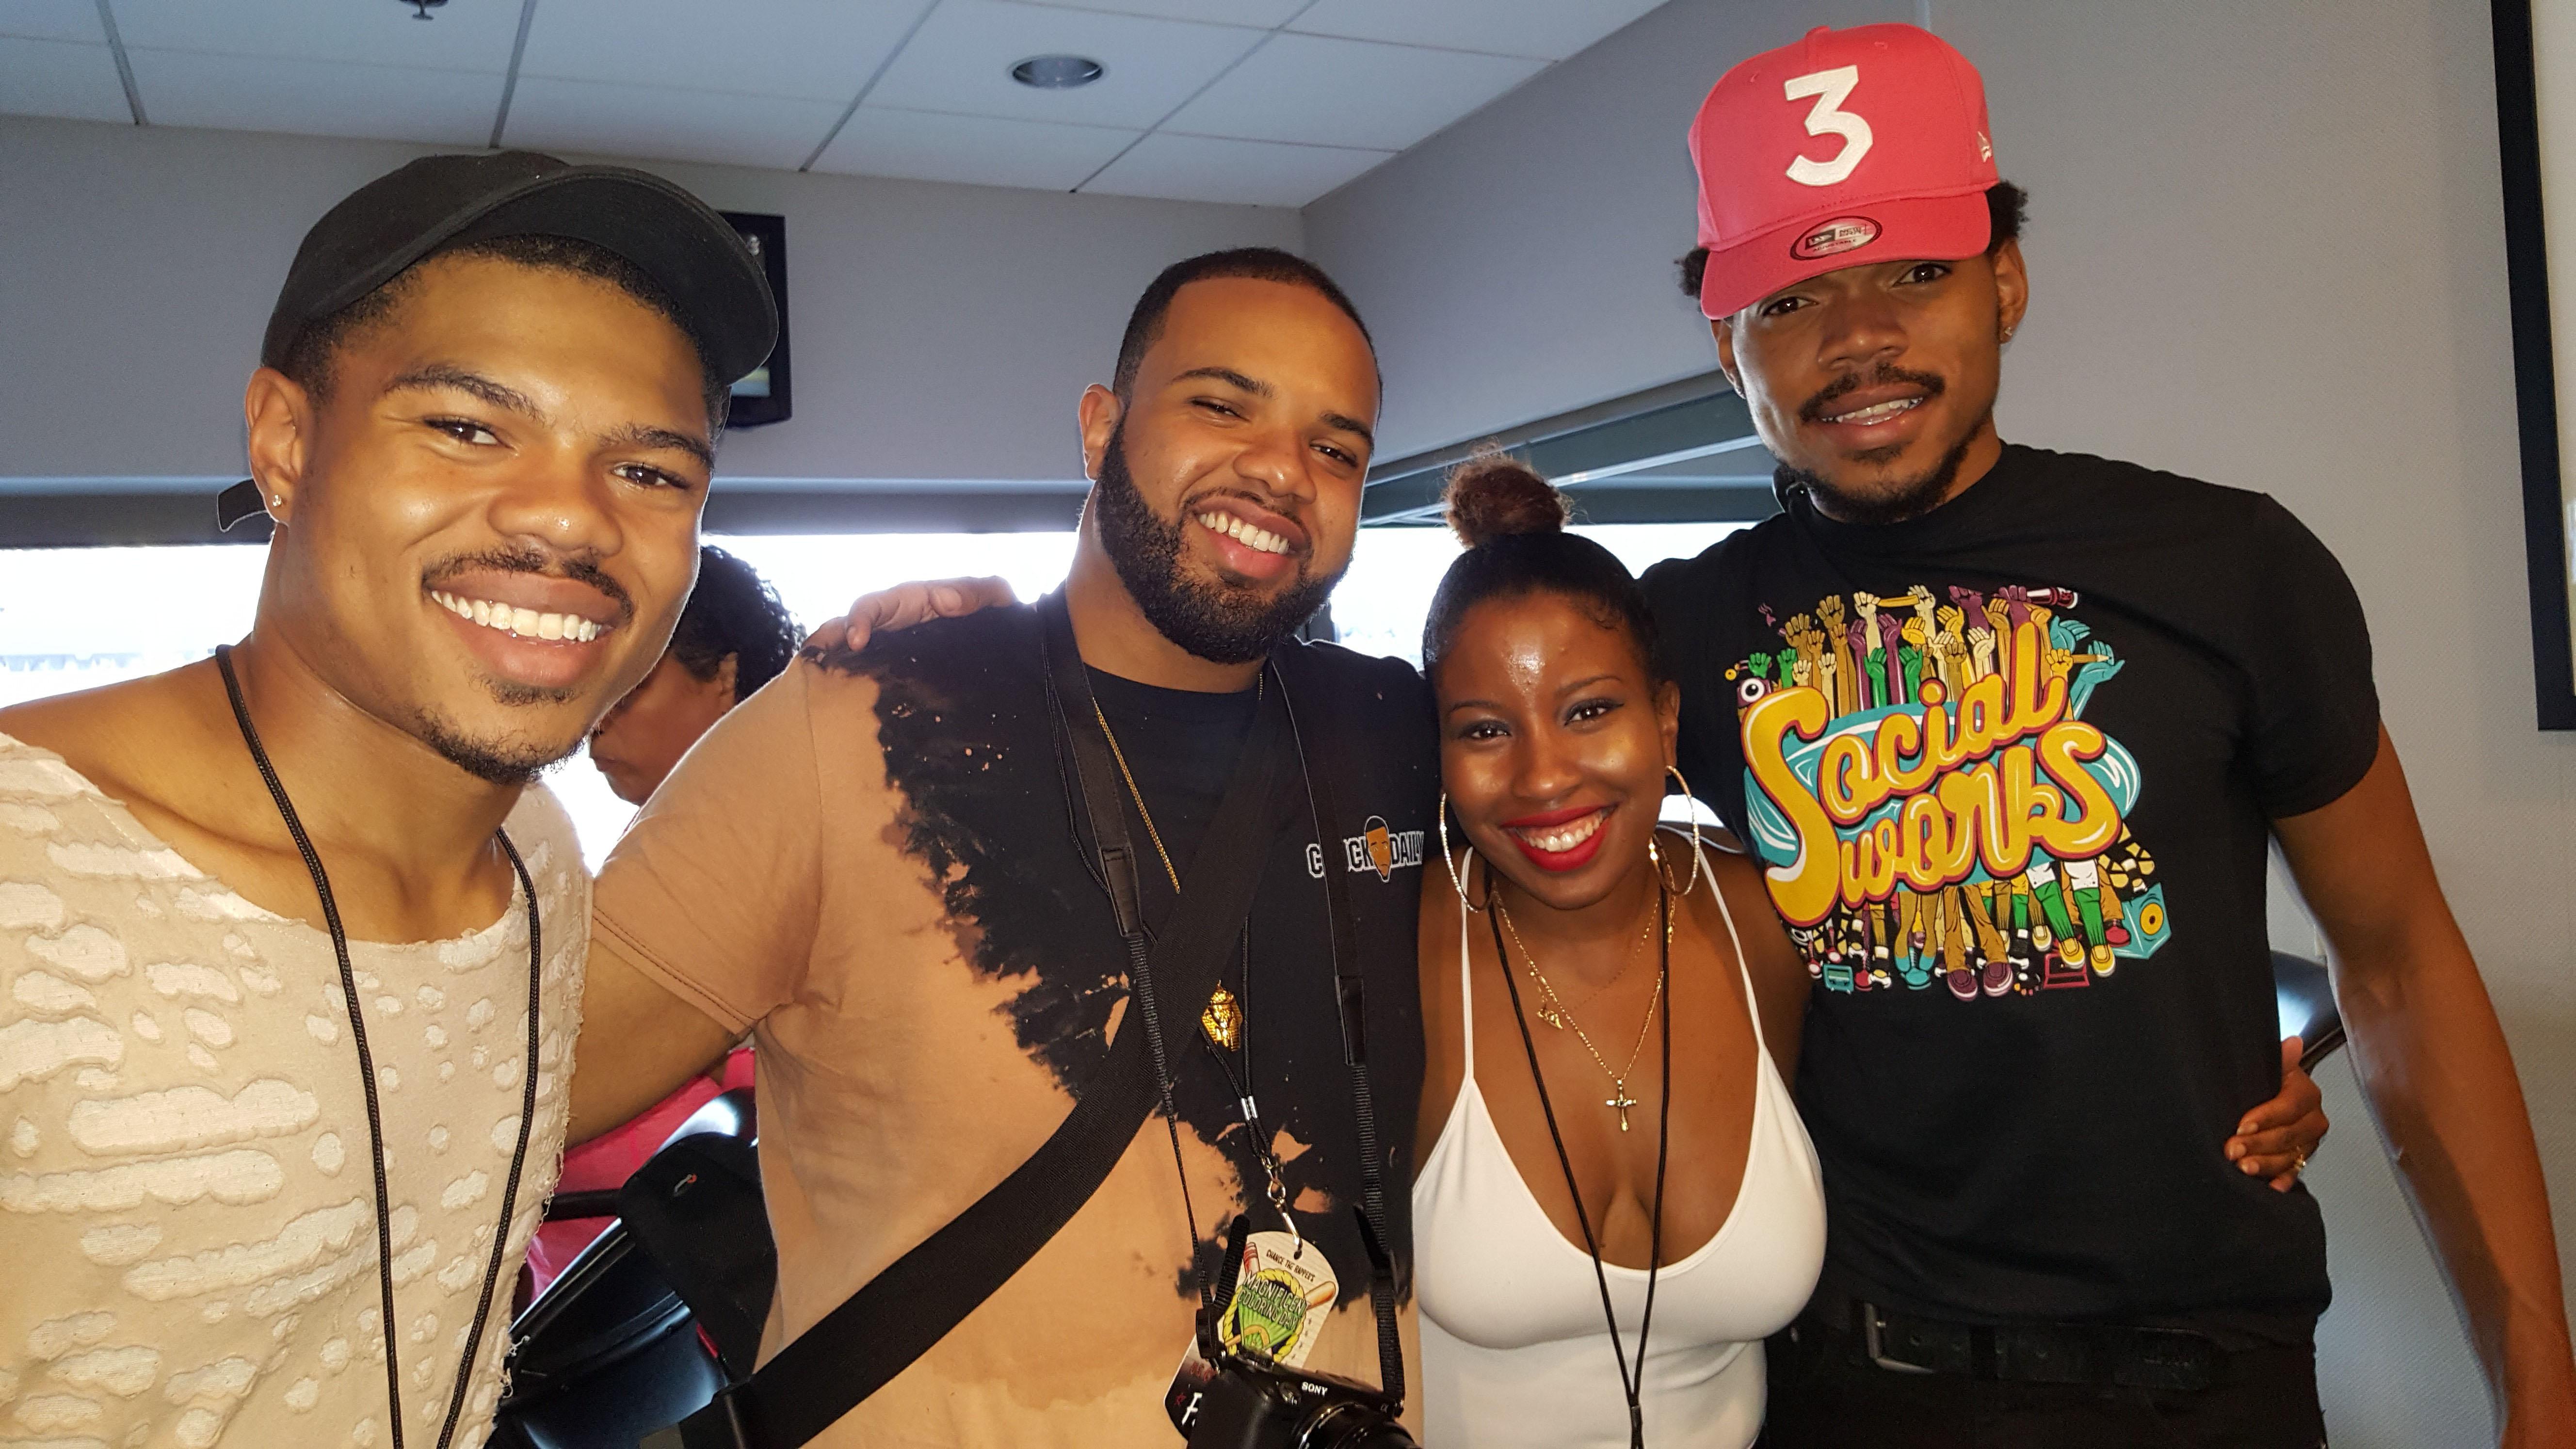 Pictured left to right are Taylor Bennett, Charles Martin III, Alex Martin and Chance the Rapper at the 2016 Magnificent Coloring Day fest at U.S. Cellular Field. (Courtesy of Ava Martin)